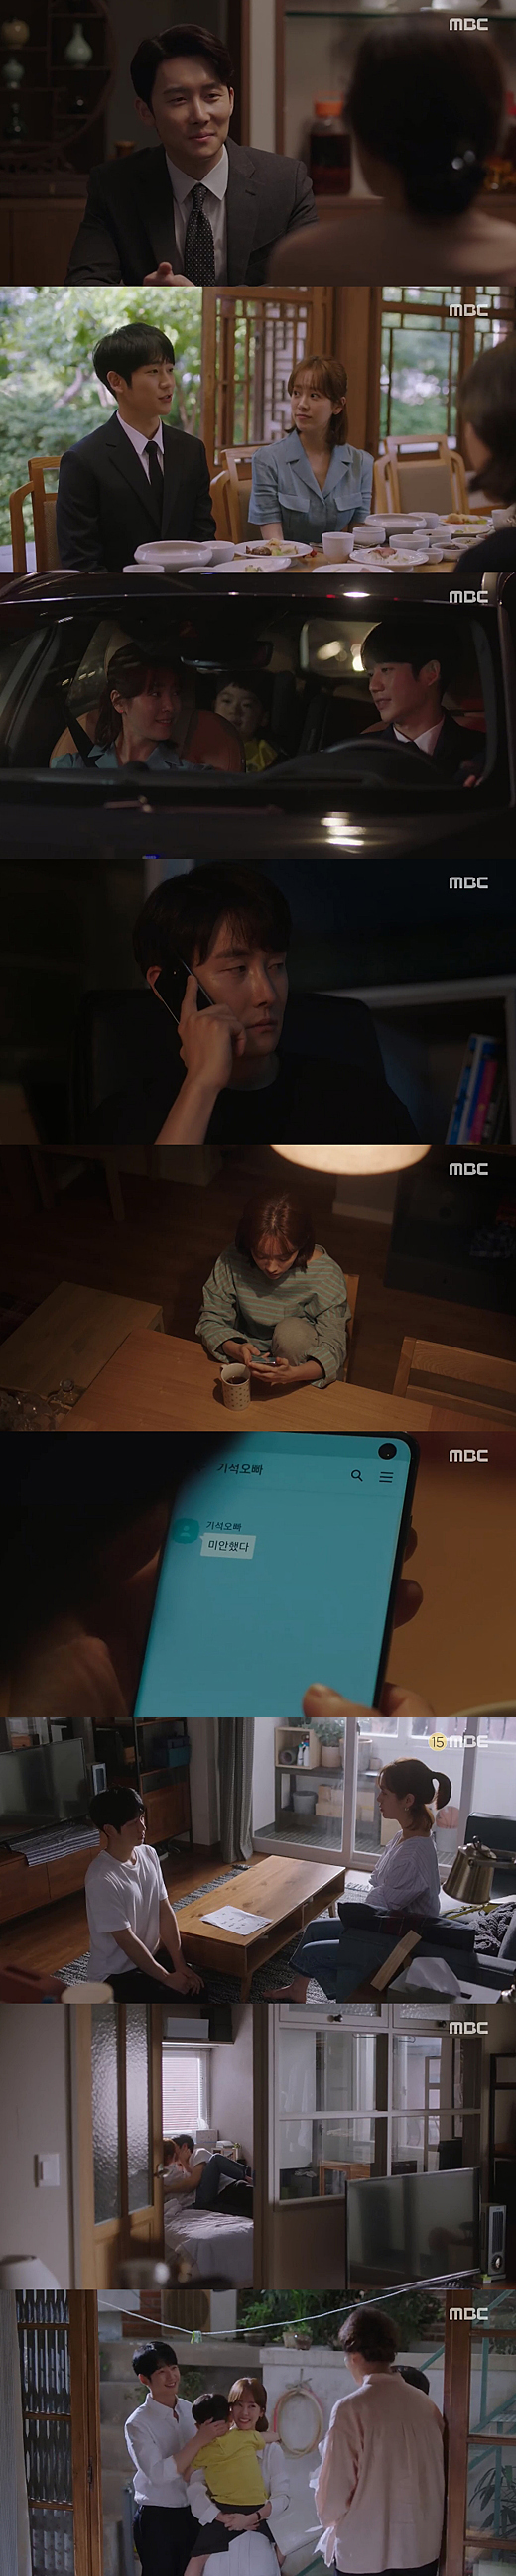 The MBC drama Spring Night (played by Kim Eun-sung, director Ahn Pan-seok) starring actor Han Ji-min and Jeong Hae-in won the beauty of Liu Cong with their highest audience rating.According to the results of Nielsen Korea, the last episode of Spring Night, which was broadcast on November 11, recorded 7.4% (hereinafter based on the national standard) and 32 times 9.5% of ratings.It is 1.1% p higher than the previous highest audience rating of 8.4%. It is spring night which did not exceed 10% wall but finished the best audience rating at the last time.The ending was warm.In the last episode, Kwon Ki-seok (Kim Jun-han), who was terribly obsessed with Choi Jung-in, gave up Choi Jung-in after hearing his fathers words and apologized in letters for I was sorry, and Choi Jung-in and Yoo Ji-ho (Jung Hae-in) promised to marry each other, being recognized by each others parents.The last scene of Spring Night was directed by Choi Jung-in and Jiho kissing at the pharmacy.Spring Night was reunited by Ahn Pan-seok PD and Kim Eun-jae, who made JTBC drama Bob Good Sister last year, and cast the actor Jung Hae-in, who was a beautiful sister who buys rice well.Han Ji-min and Jung Hae-in met by chance and fell in love like fate, and painted the process of overcoming the difficulties in front of each other and achieving love realistically.